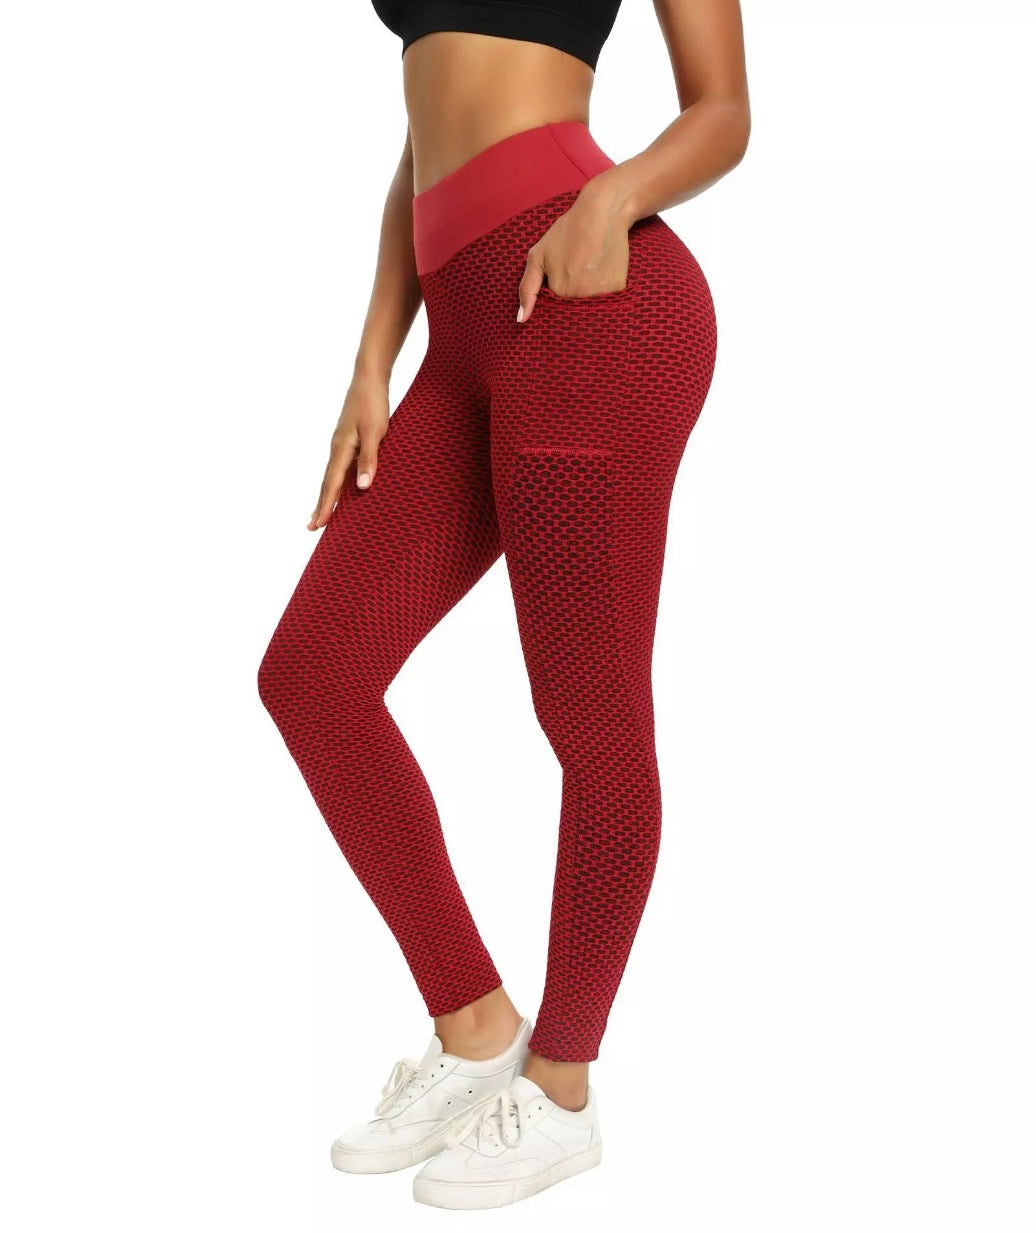 Womens Honeycomb Foam Tiktok Yoga Pants With Pocket Perfect For Booty  Lifting, Gym, Running, And Athletic Wear From Sportsyoga, $14.62